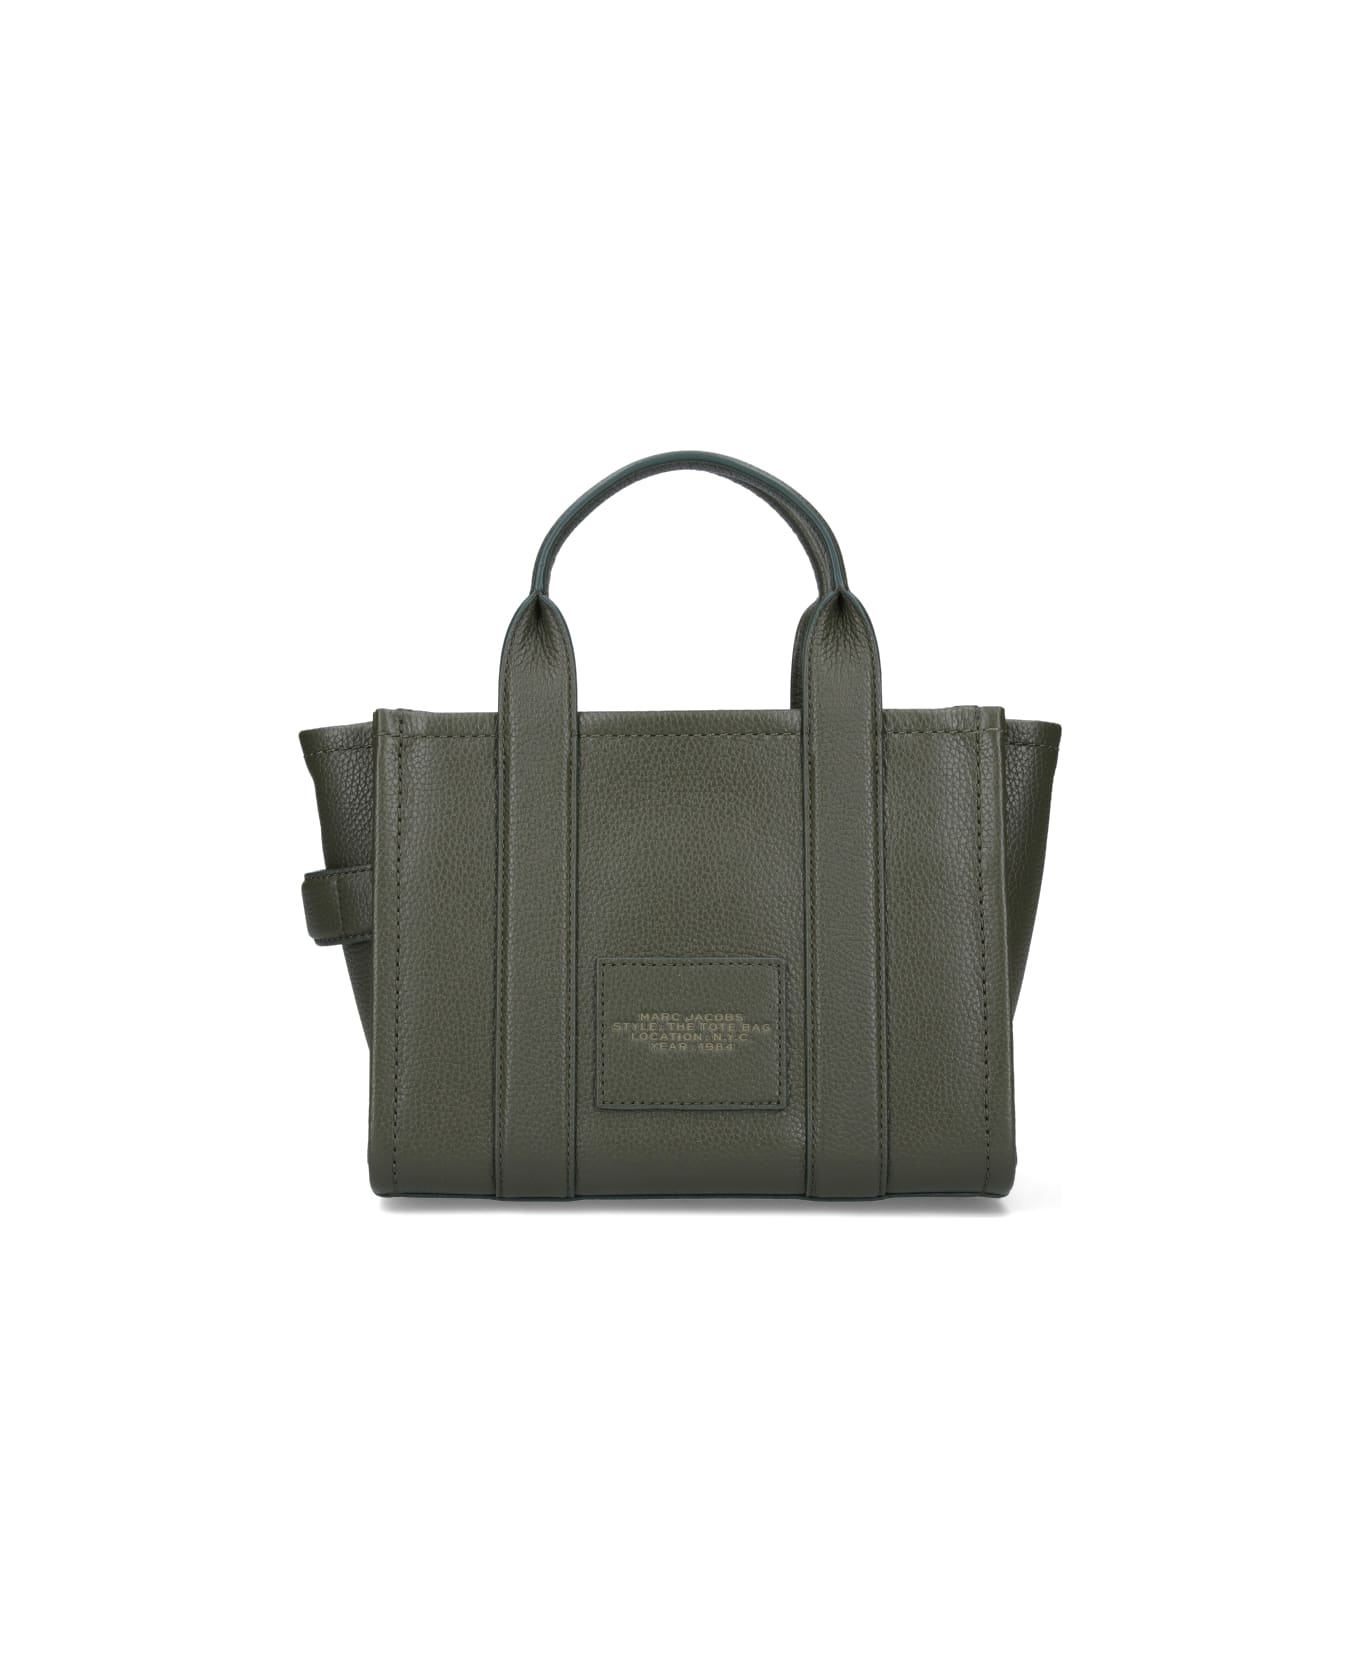 Marc Jacobs Small Tote Bag - Green